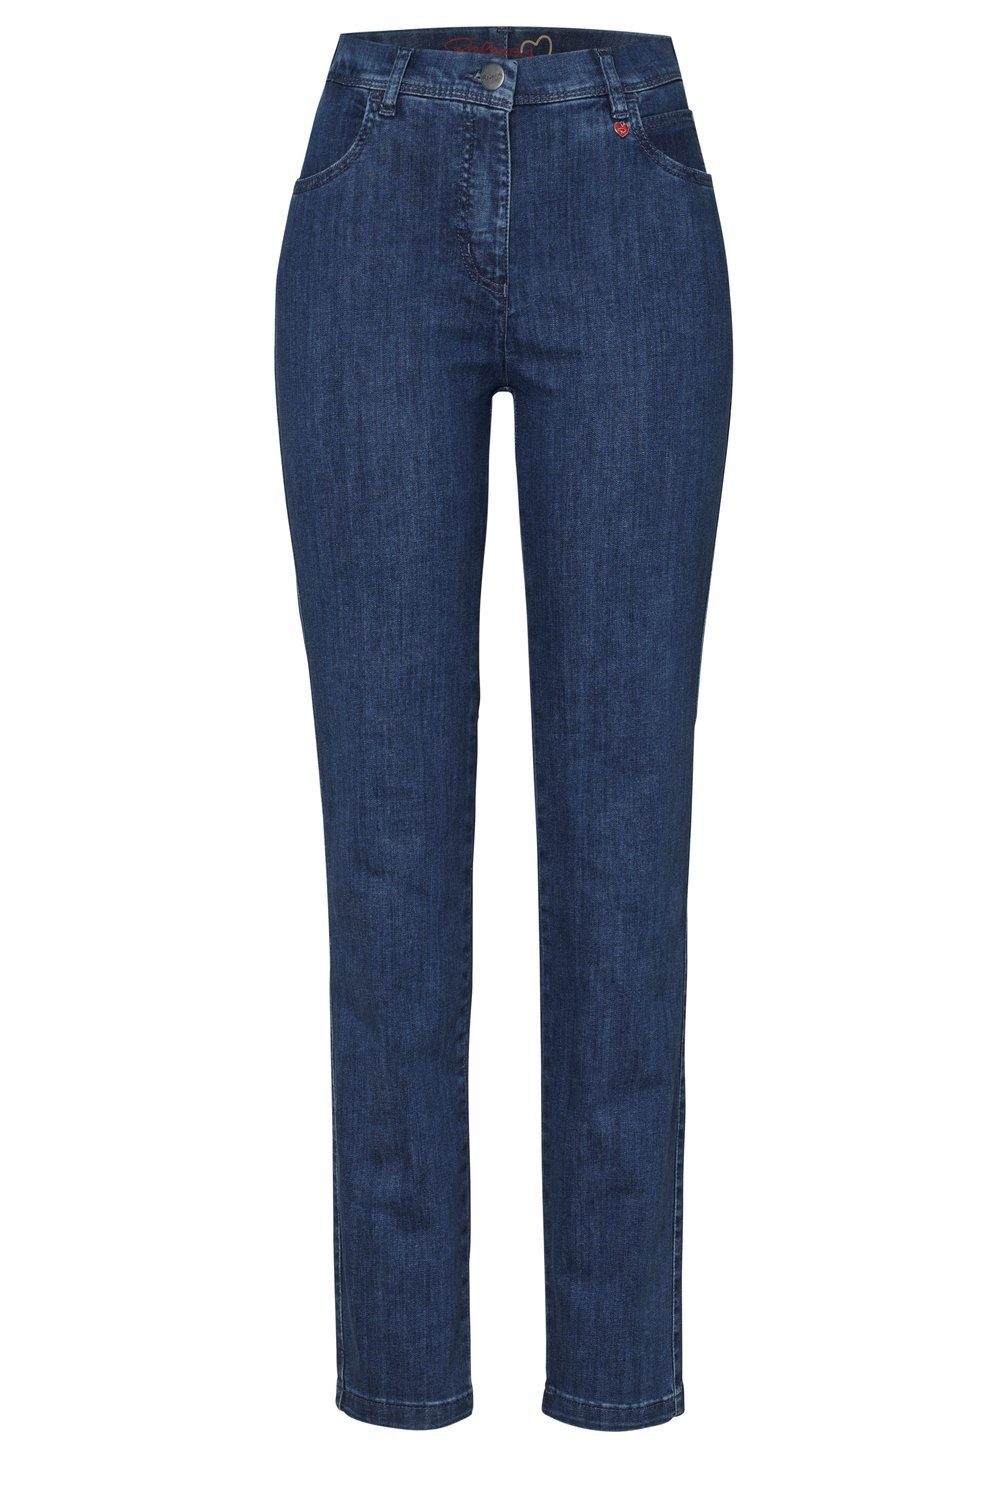 Relaxed by TONI 5-Pocket-Hose Relaxed by Toni Jeans Meine beste Freundin - blau (1-tlg)